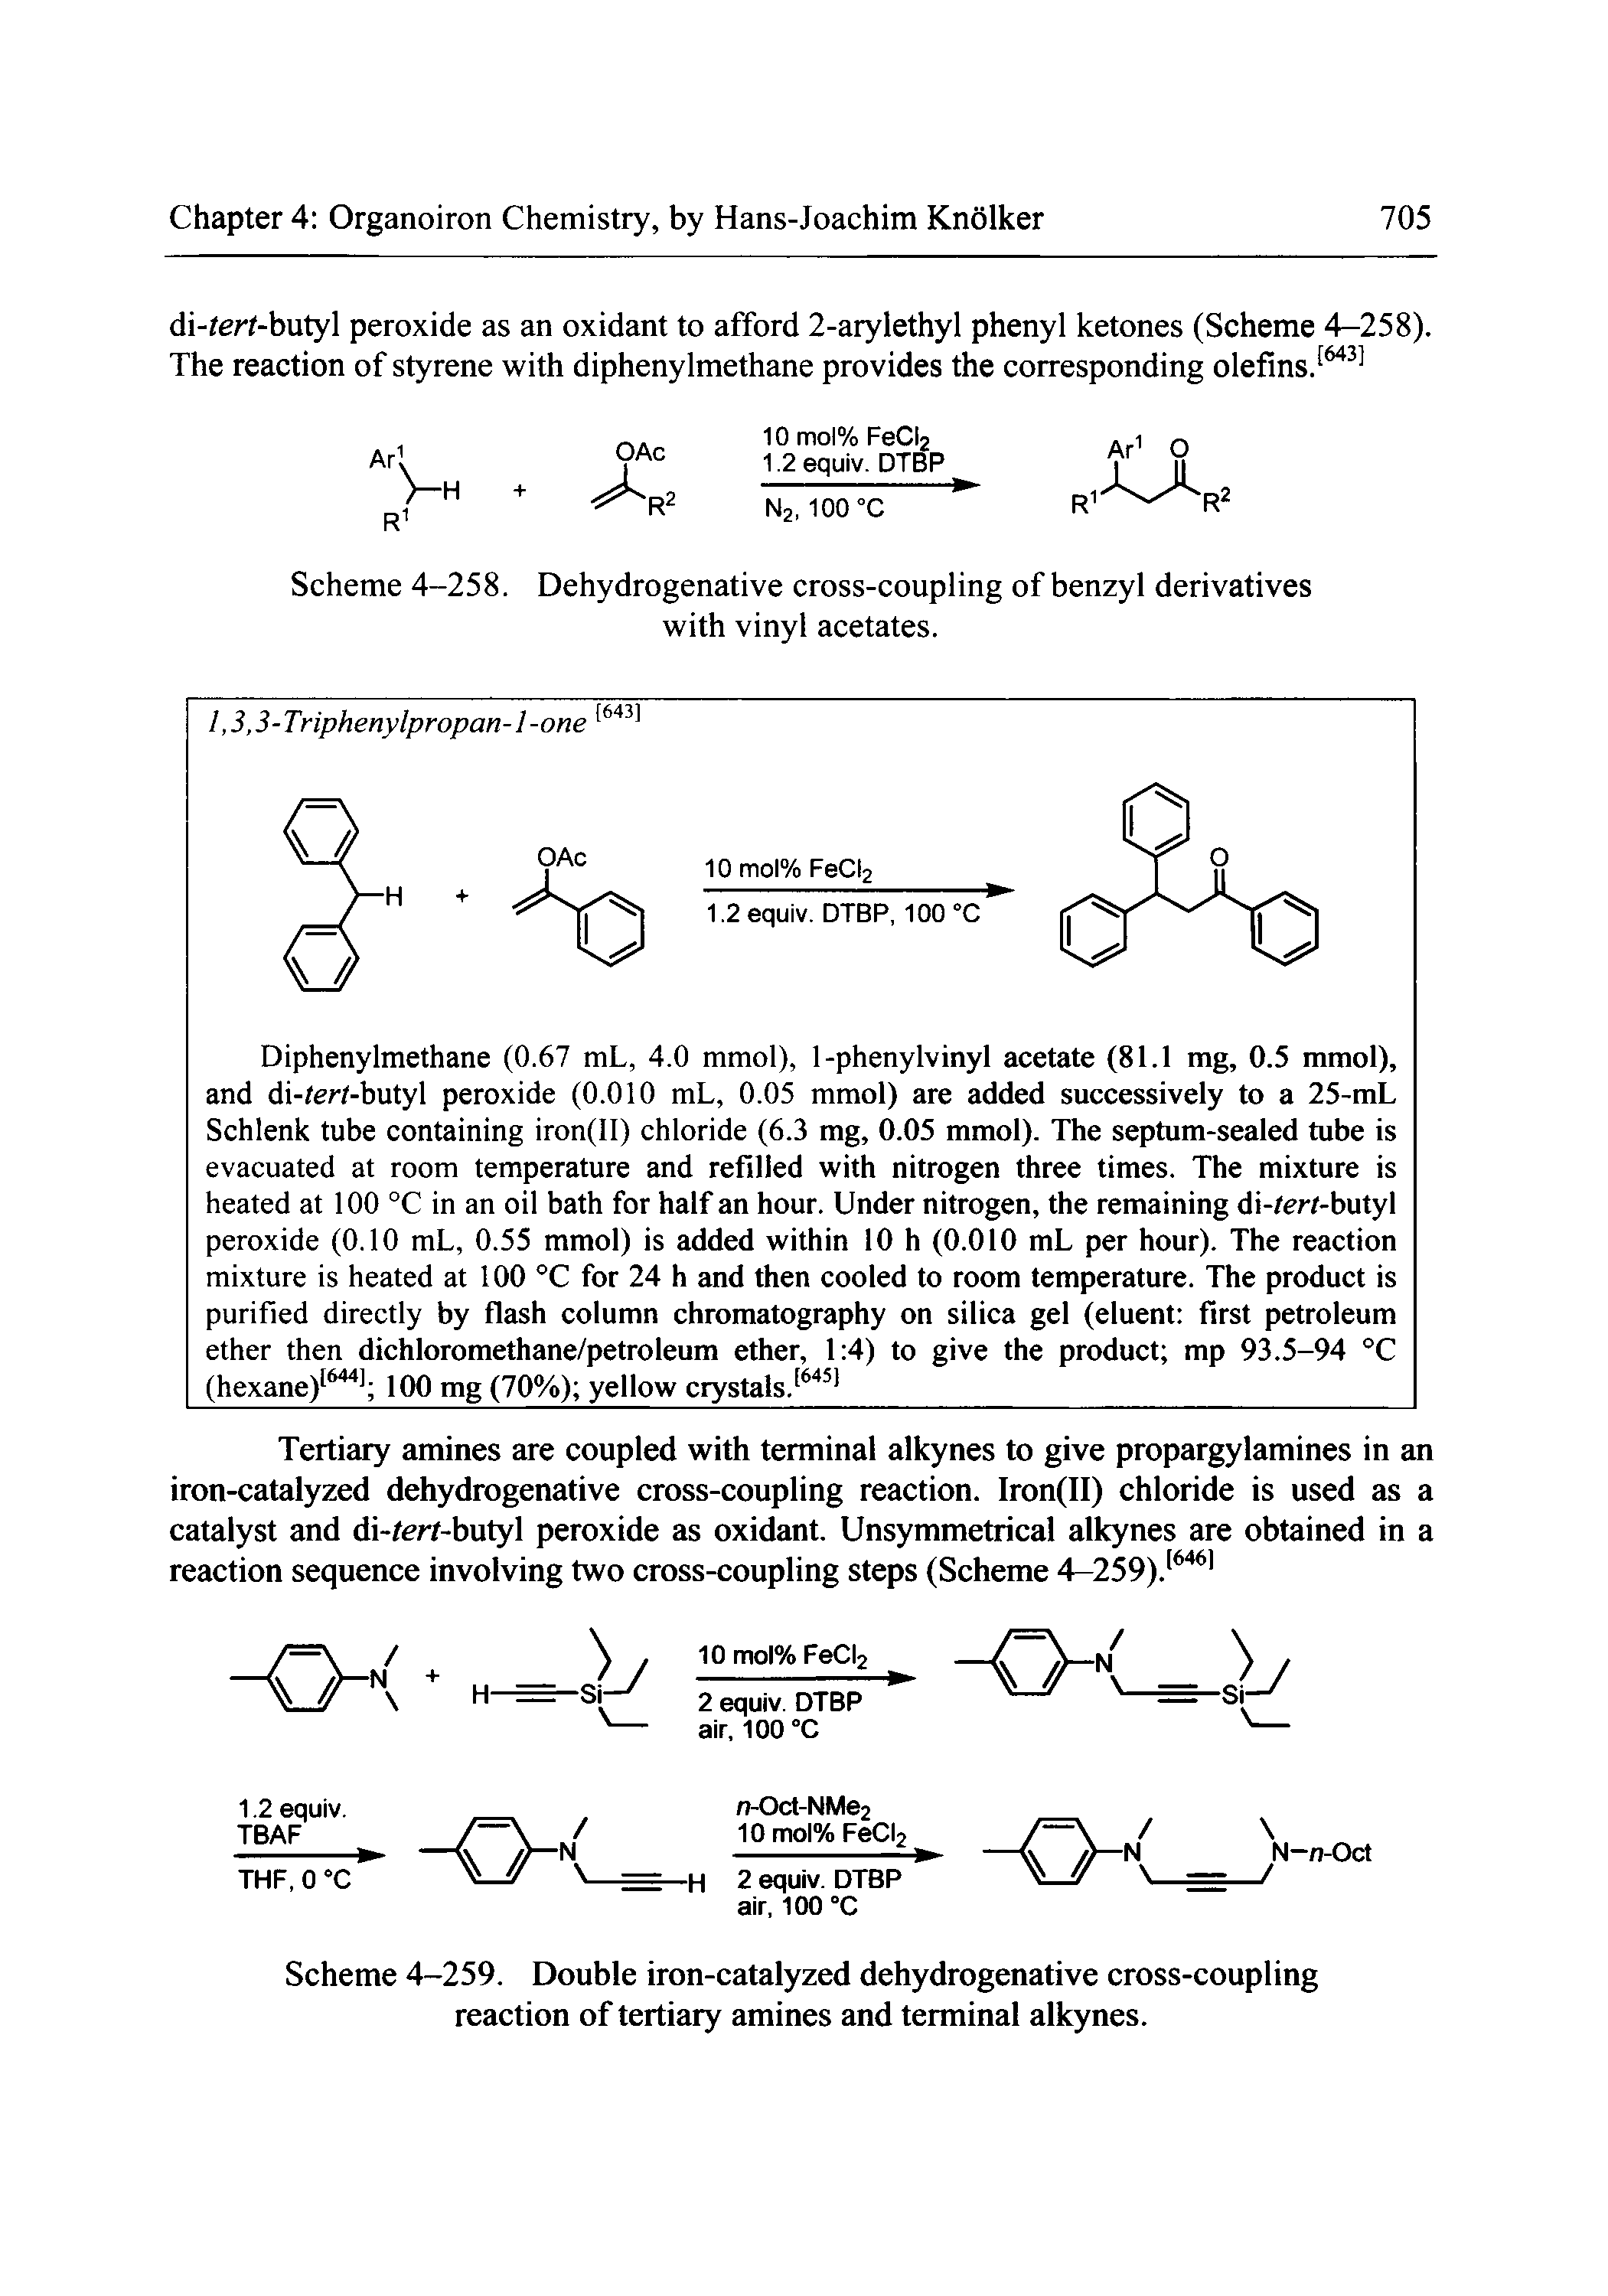 Scheme 4-259. Double iron-catalyzed dehydrogenative cross-coupling reaction of tertiary amines and terminal alkynes.